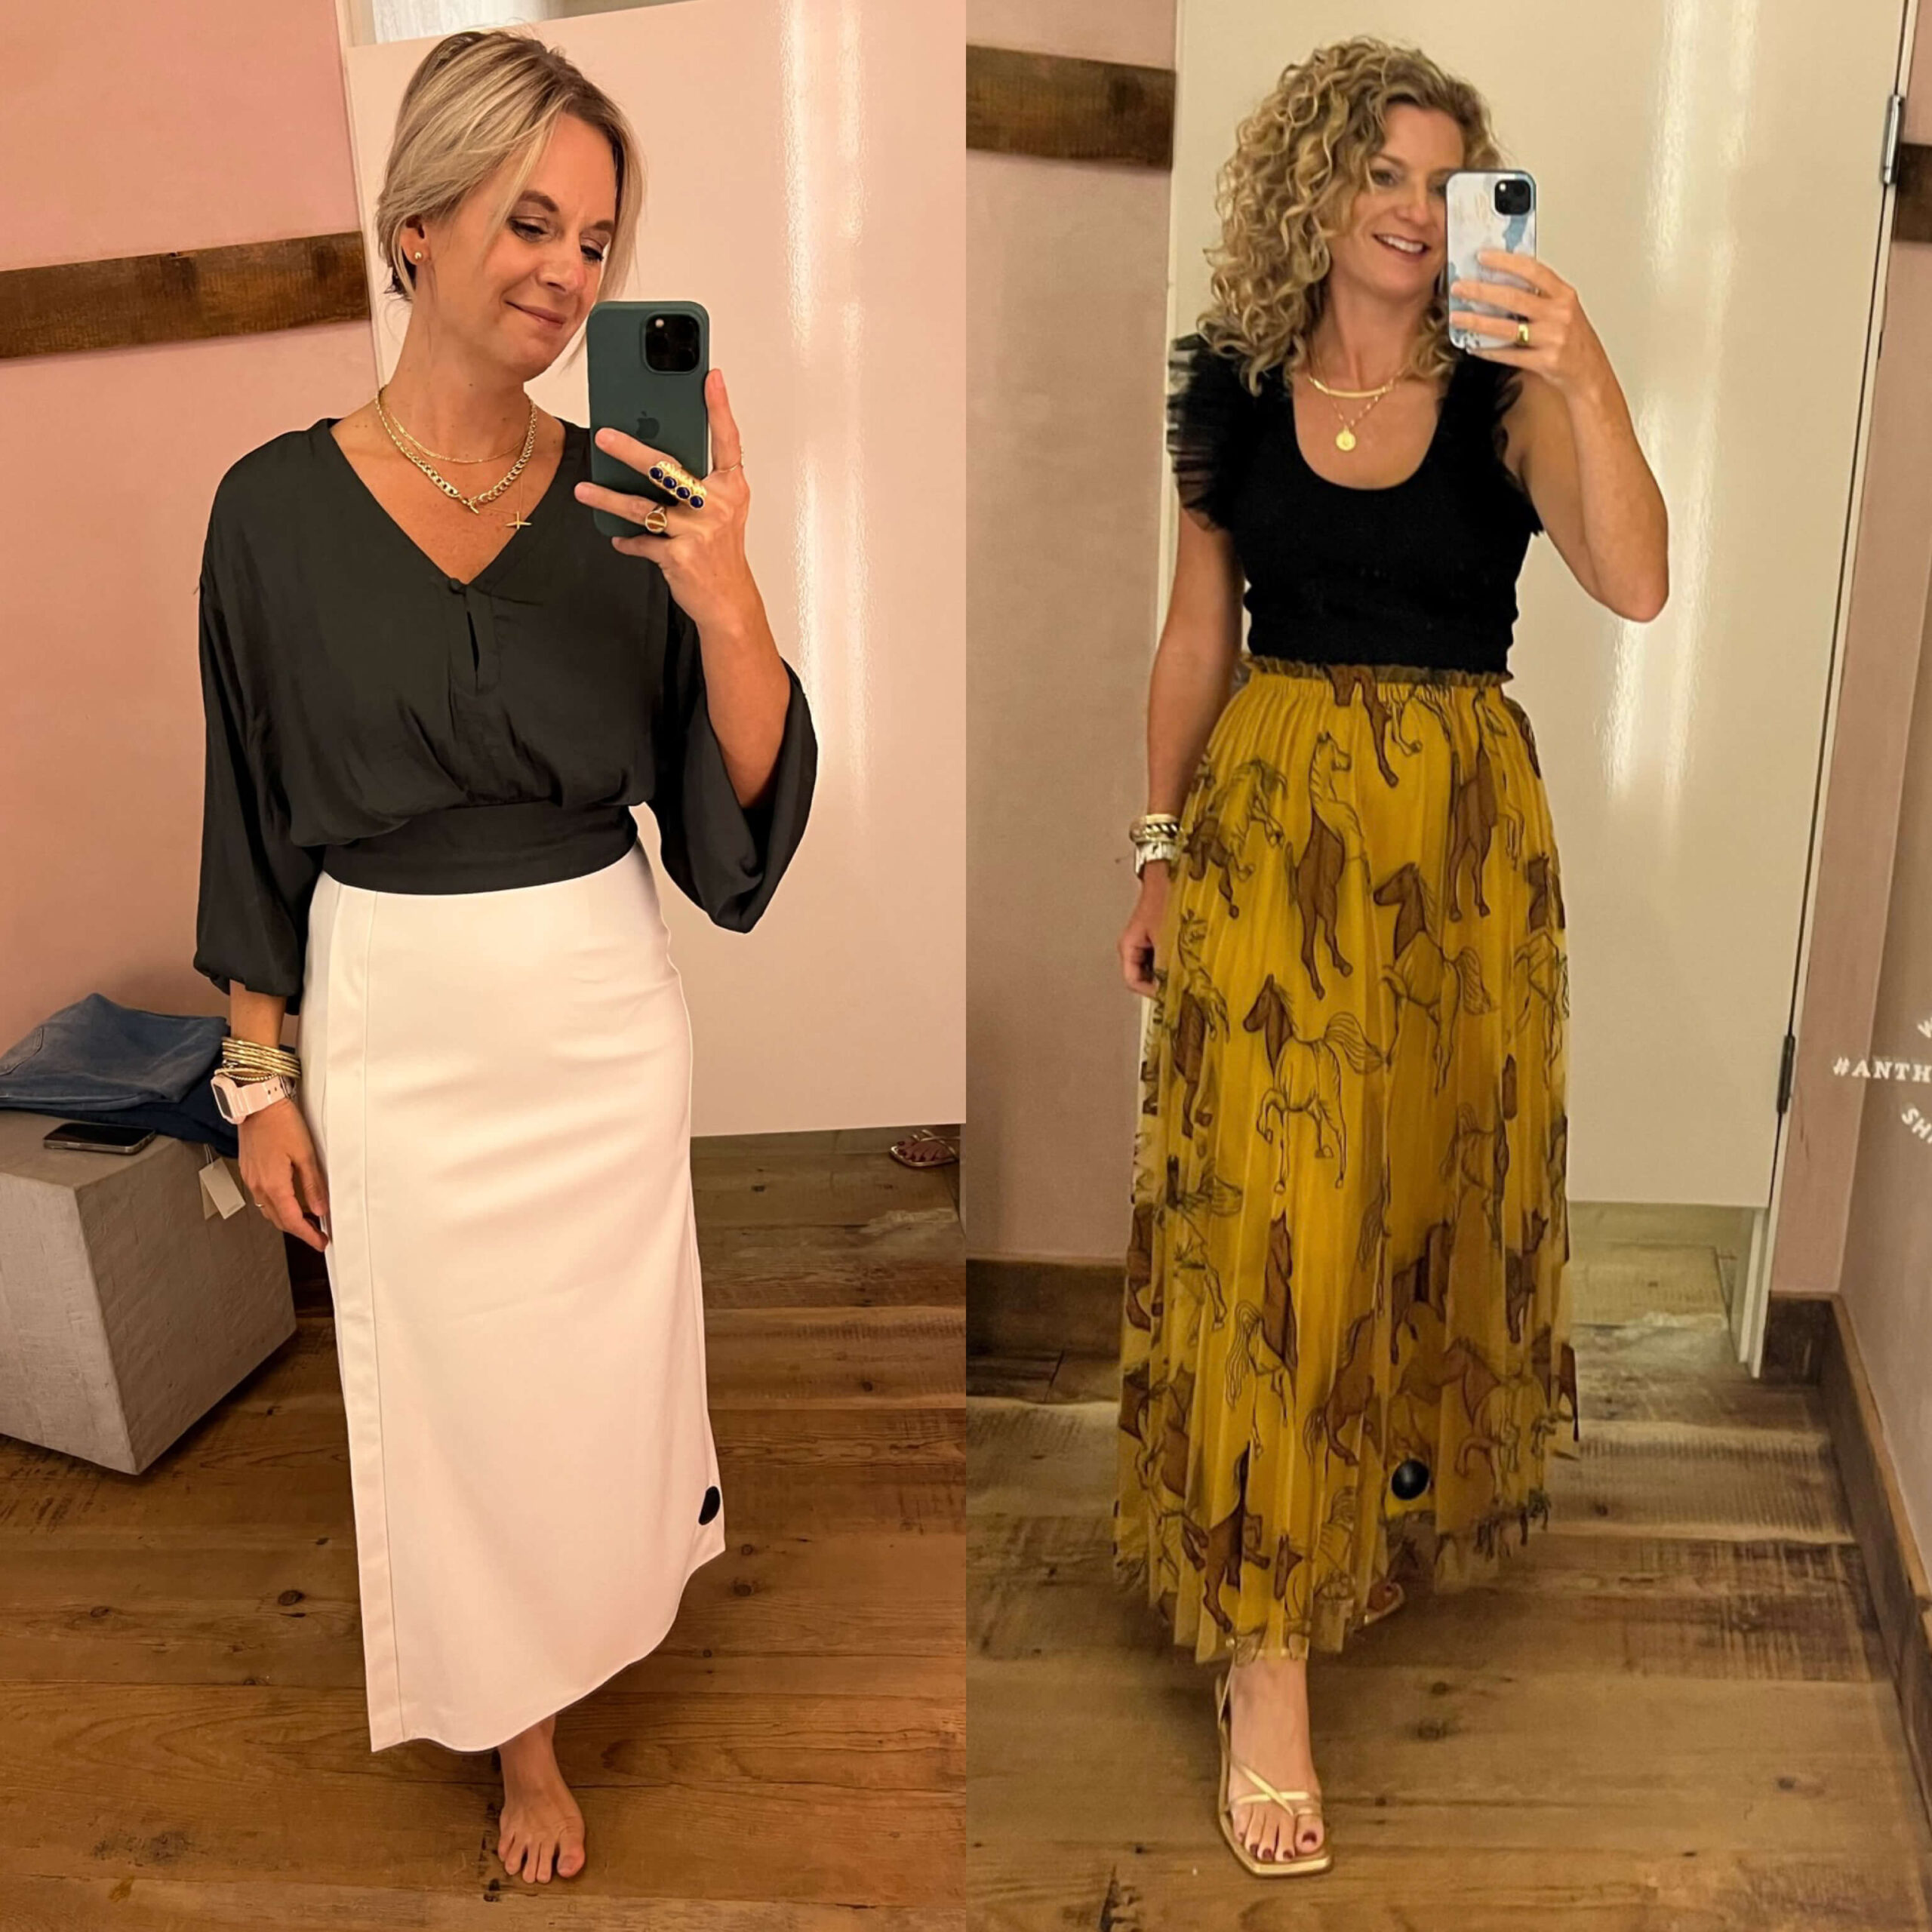 dressy skirts statement skirts how to dress a skirt up for an event fabulous skirts for events how to style a maxi skirt how to dress a maxi skirt up